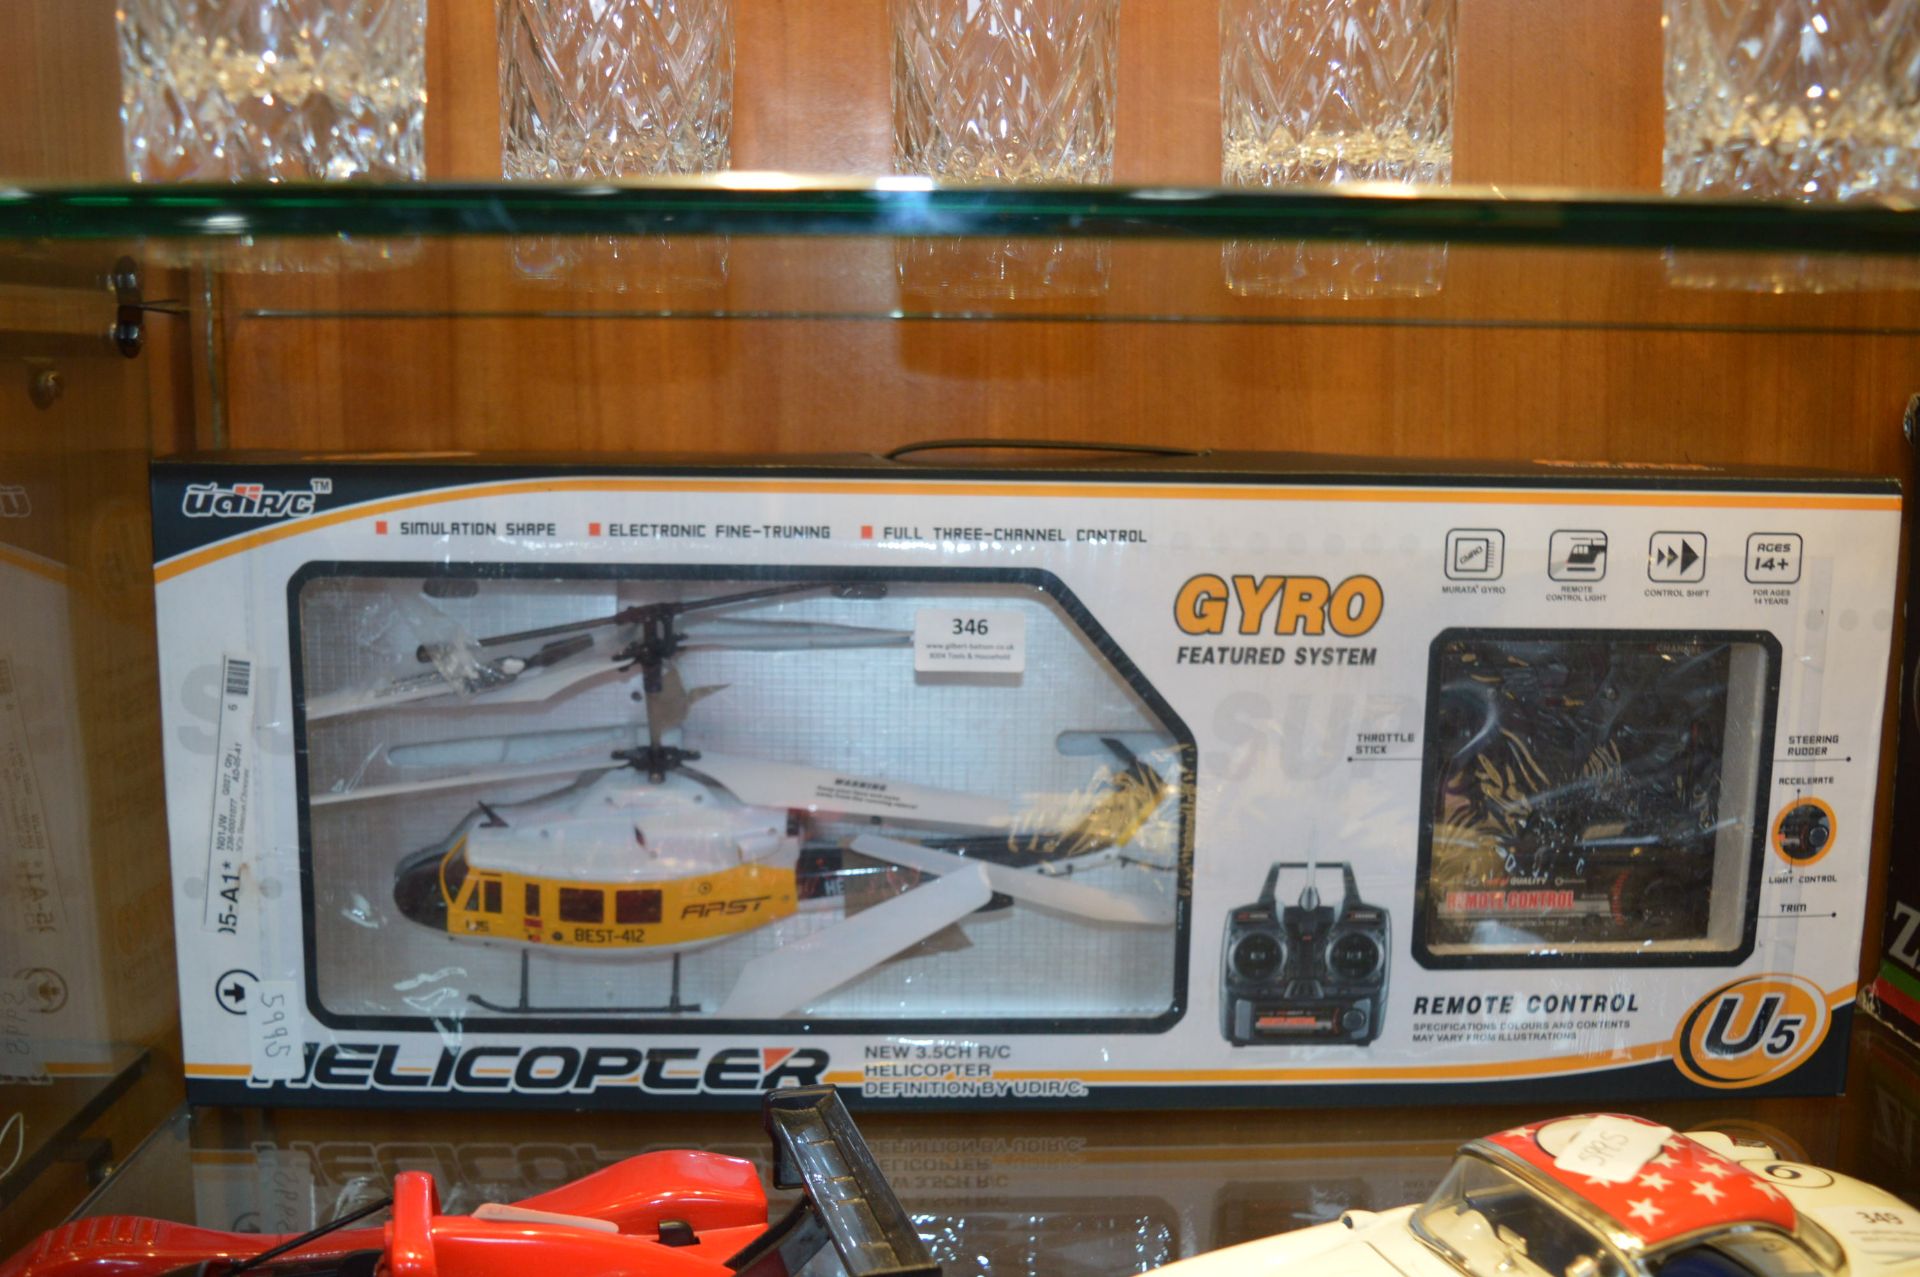 Boxed U5 Gyro System RC Helicopter